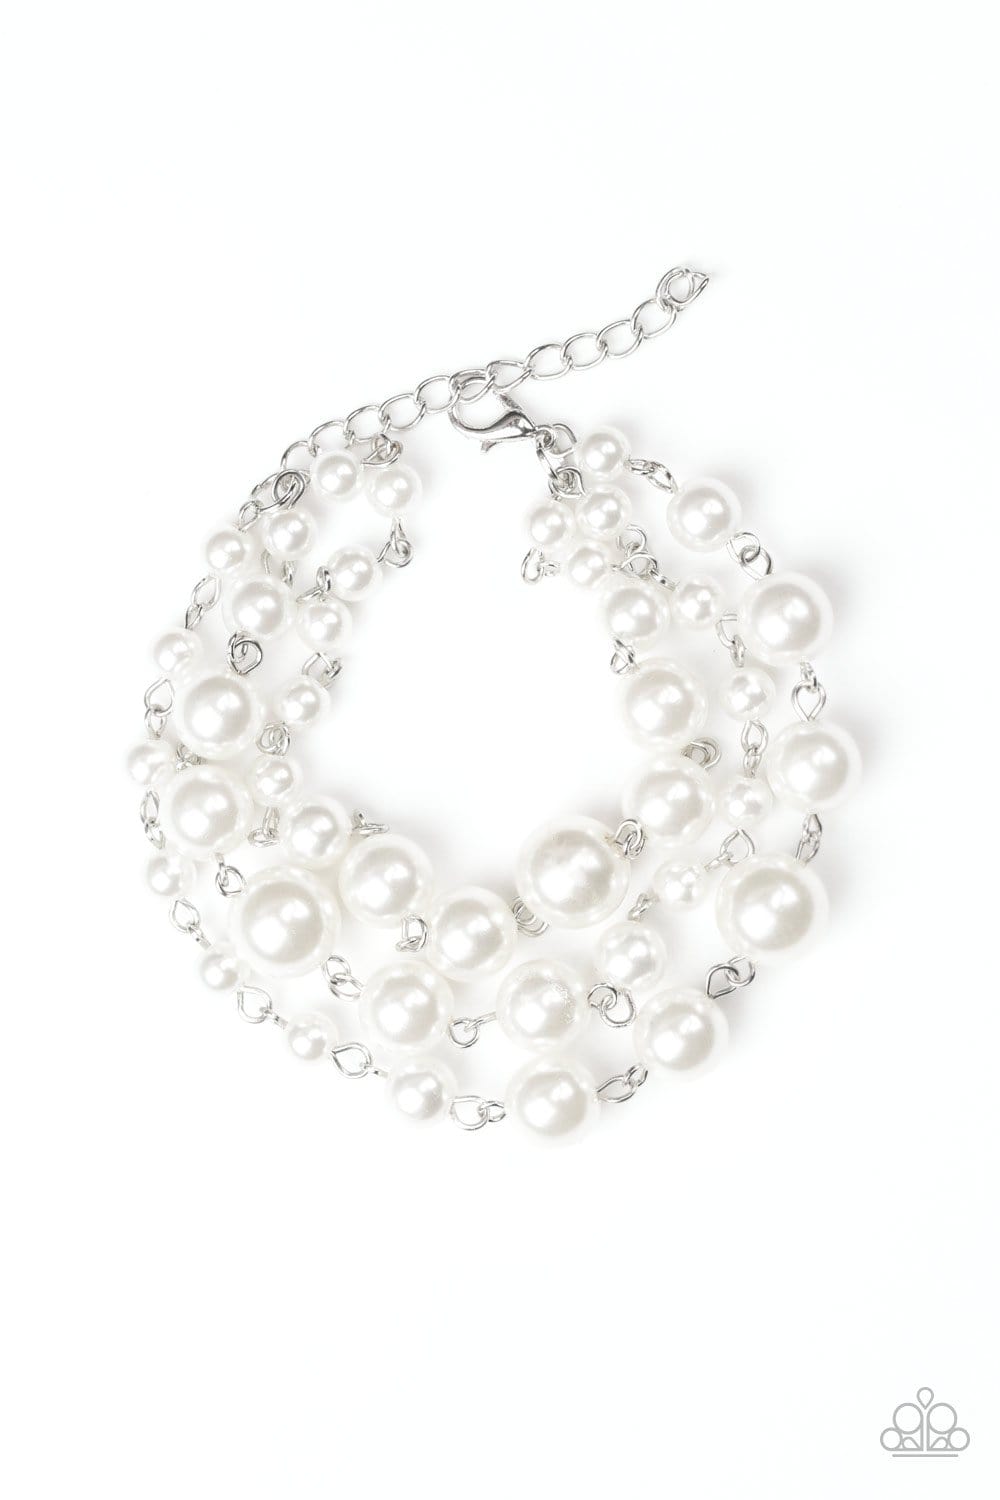 Paparazzi: Until The End Of TIMELESS - White Pearl Bracelet - Jewels N’ Thingz Boutique